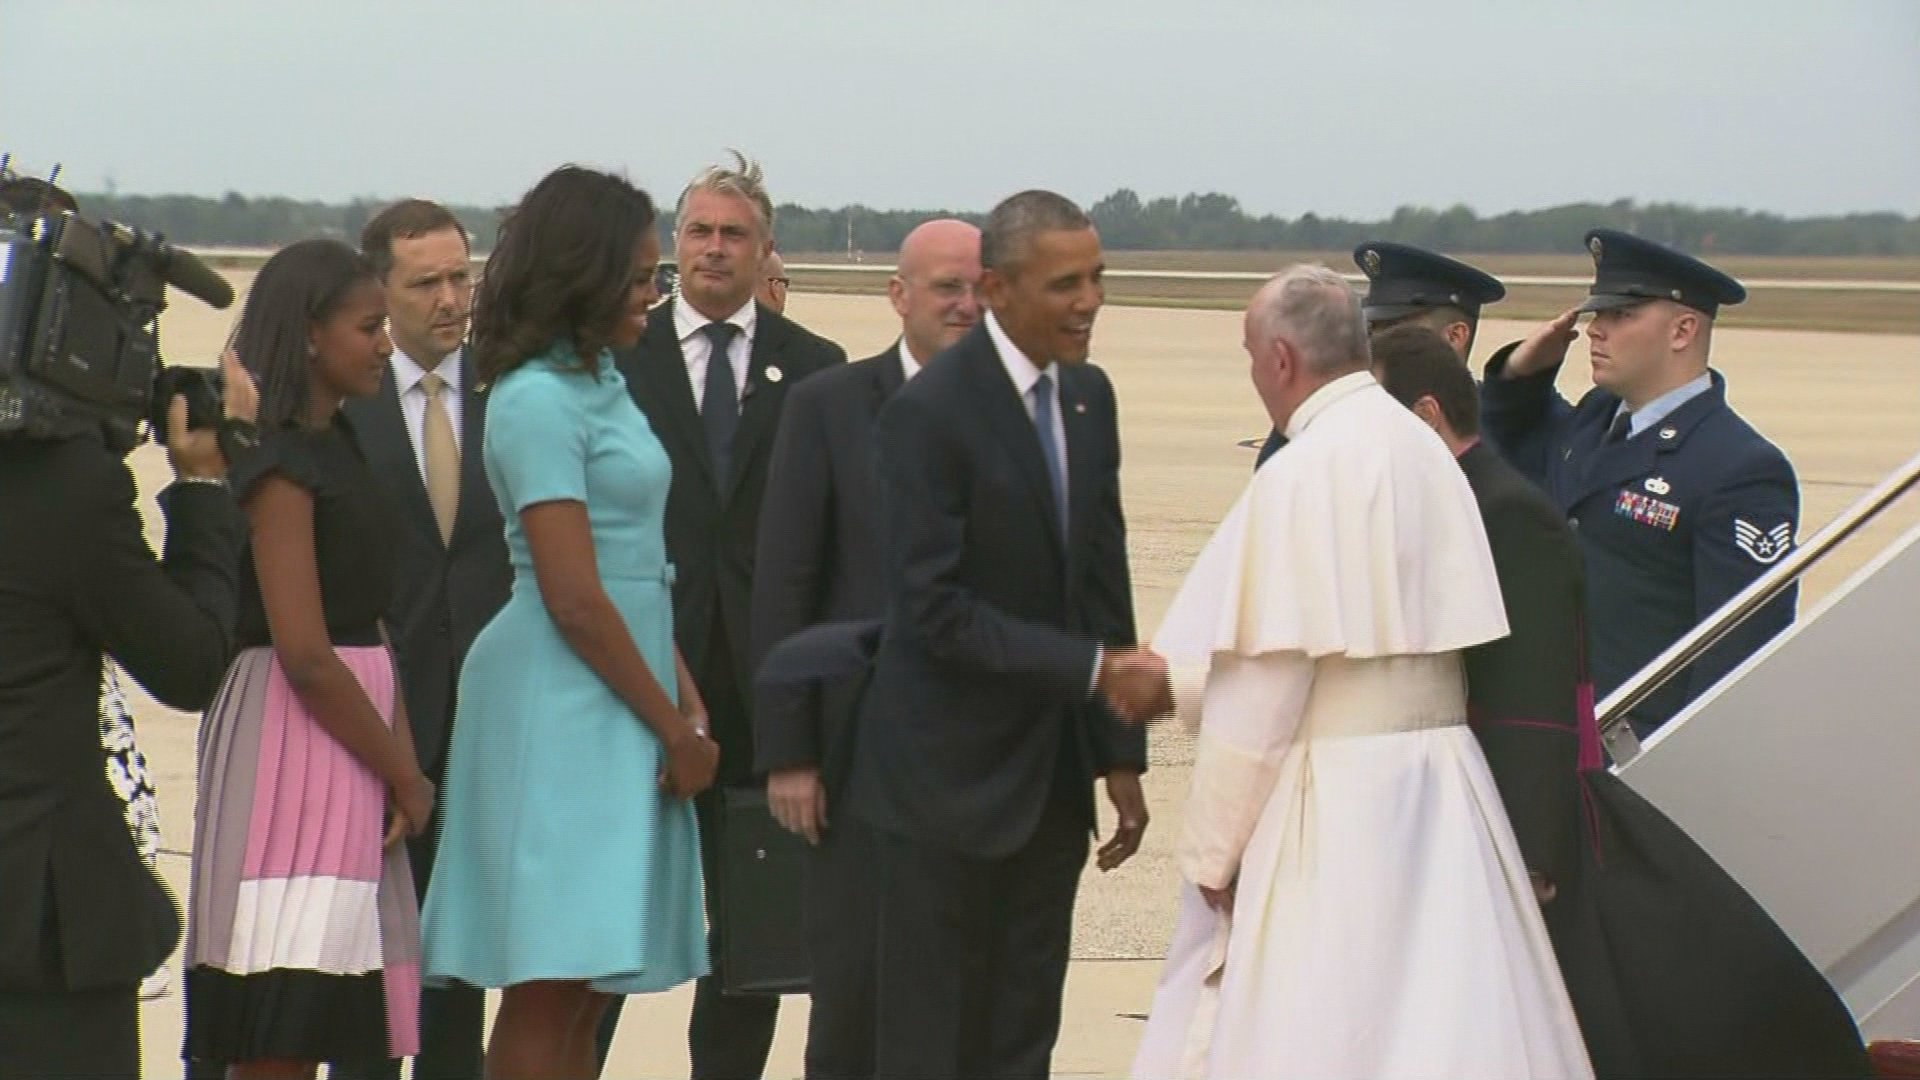 Pope Francis arrives in Washington D.C. and is greeted by President Obama.